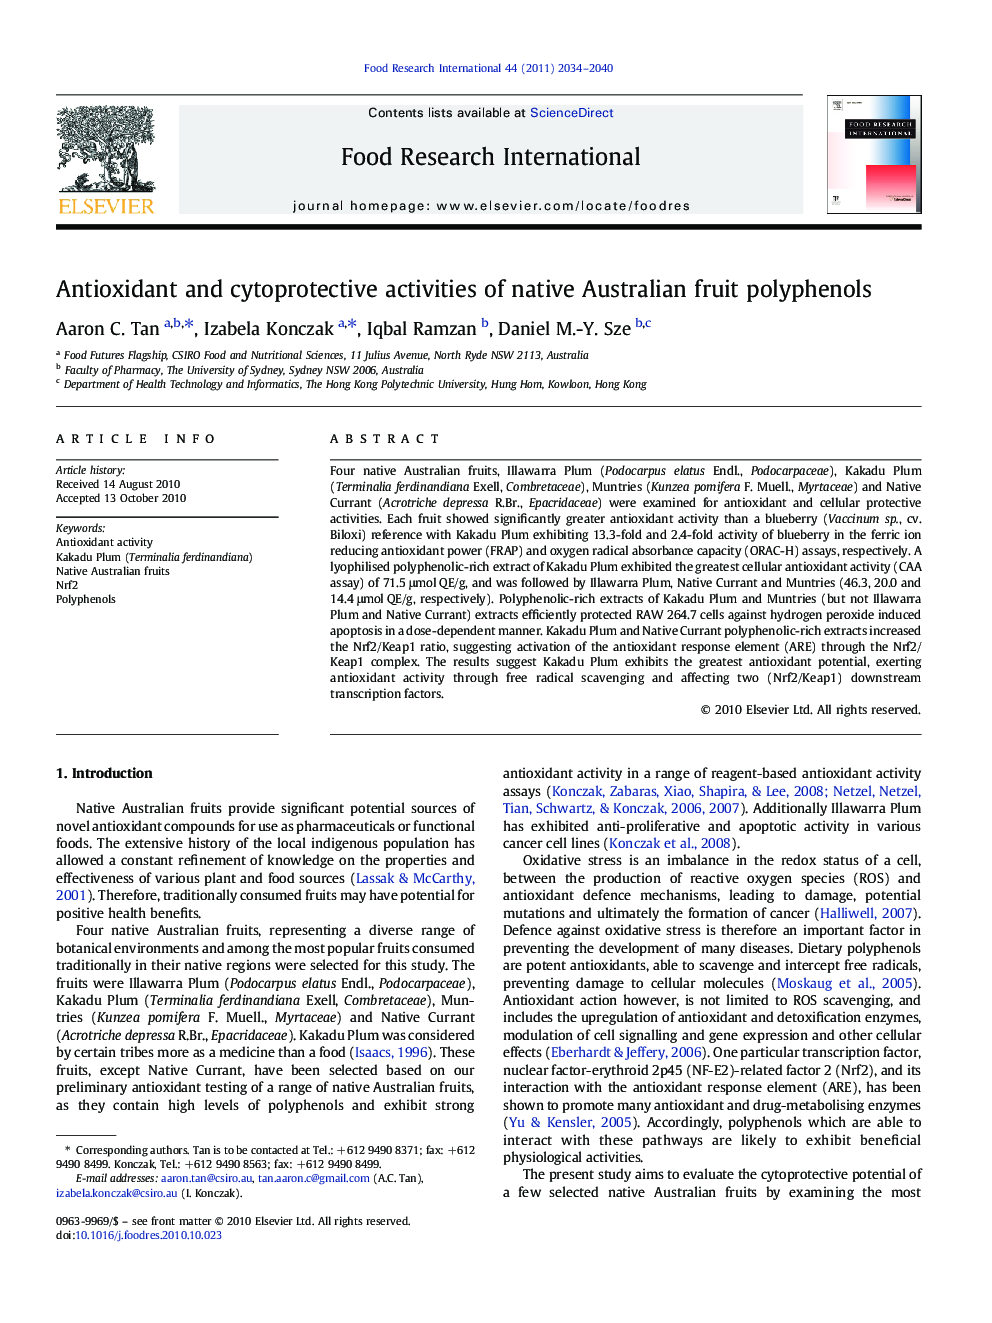 Antioxidant and cytoprotective activities of native Australian fruit polyphenols